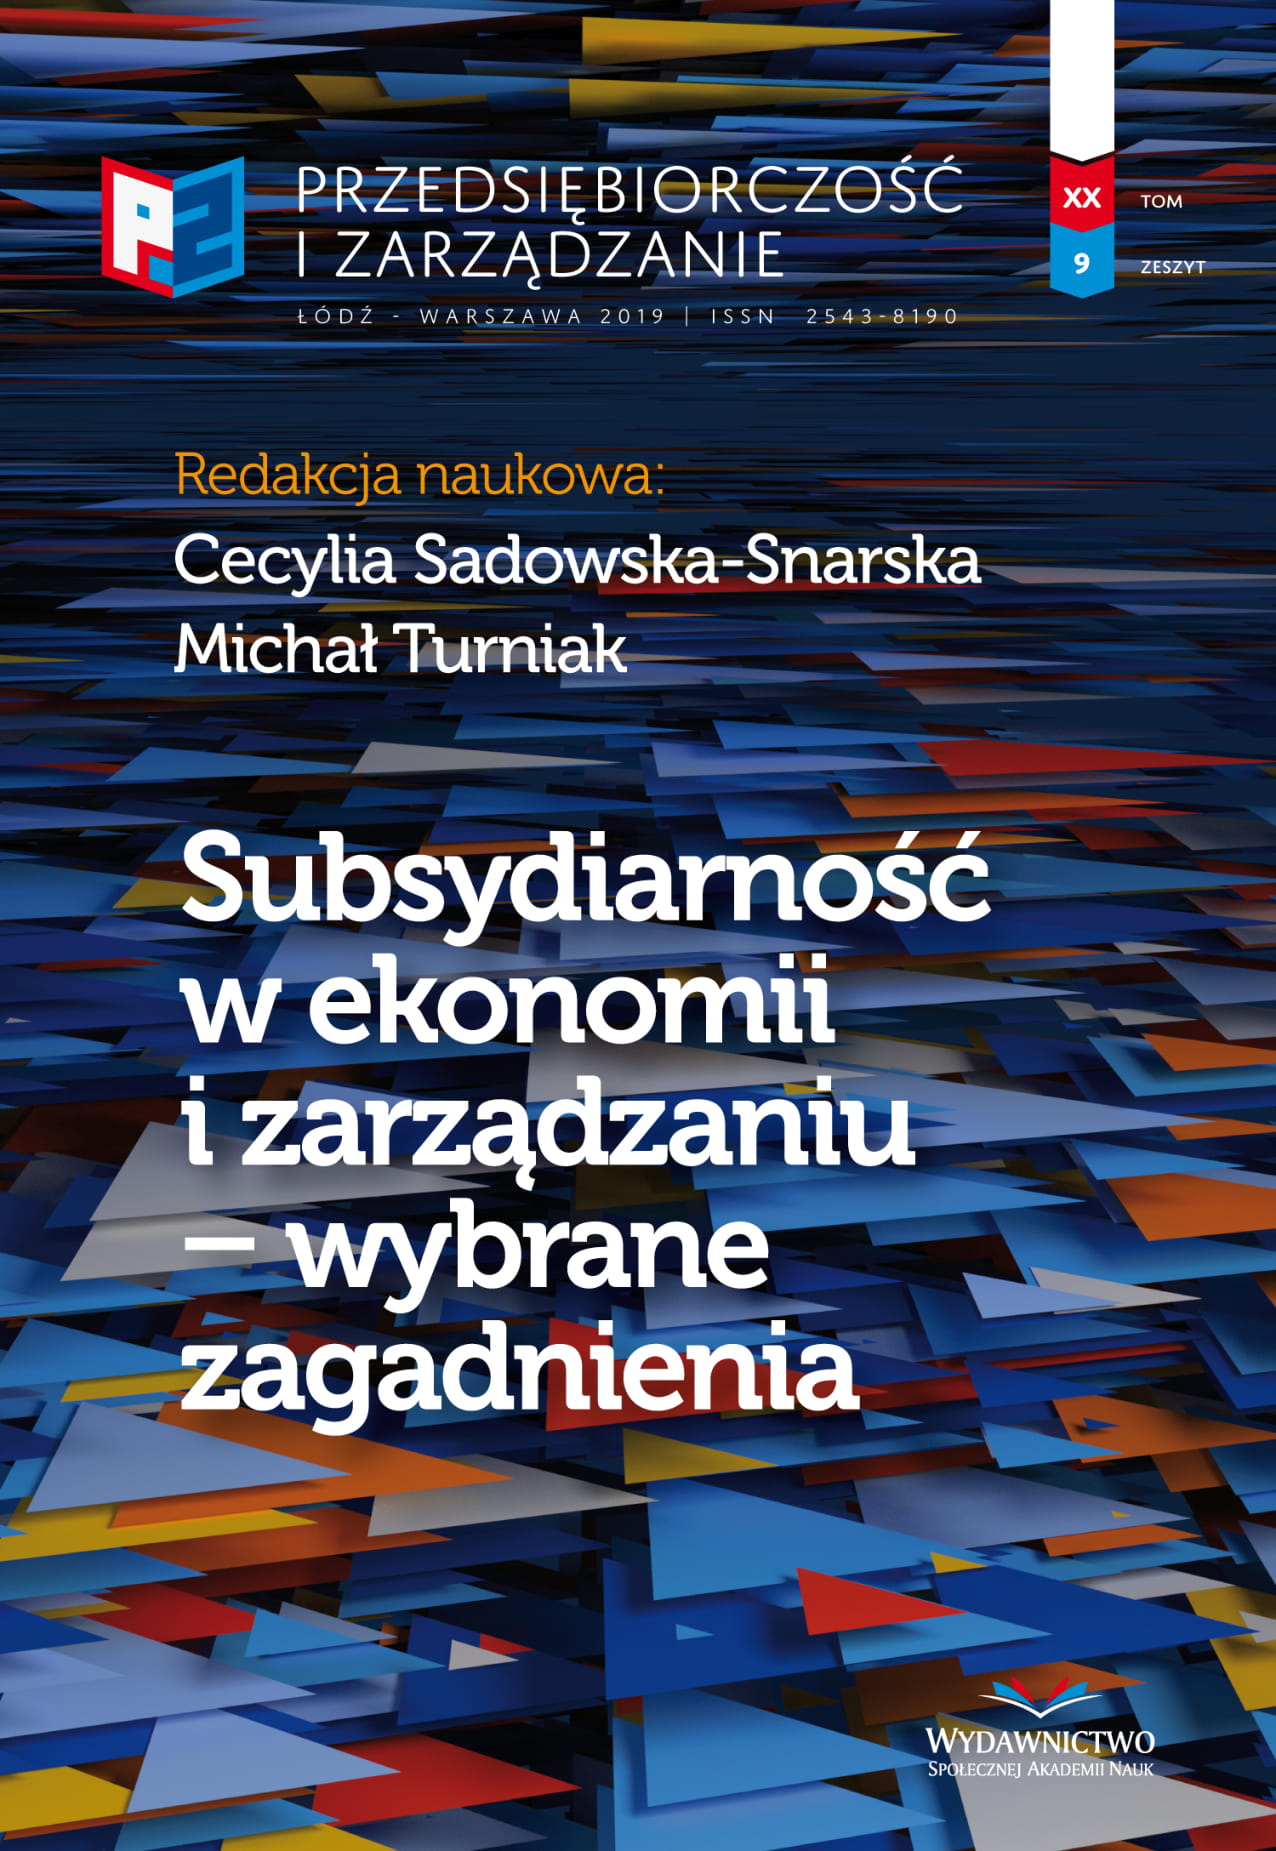 Pay Asymmetry Regional in Poland Cover Image